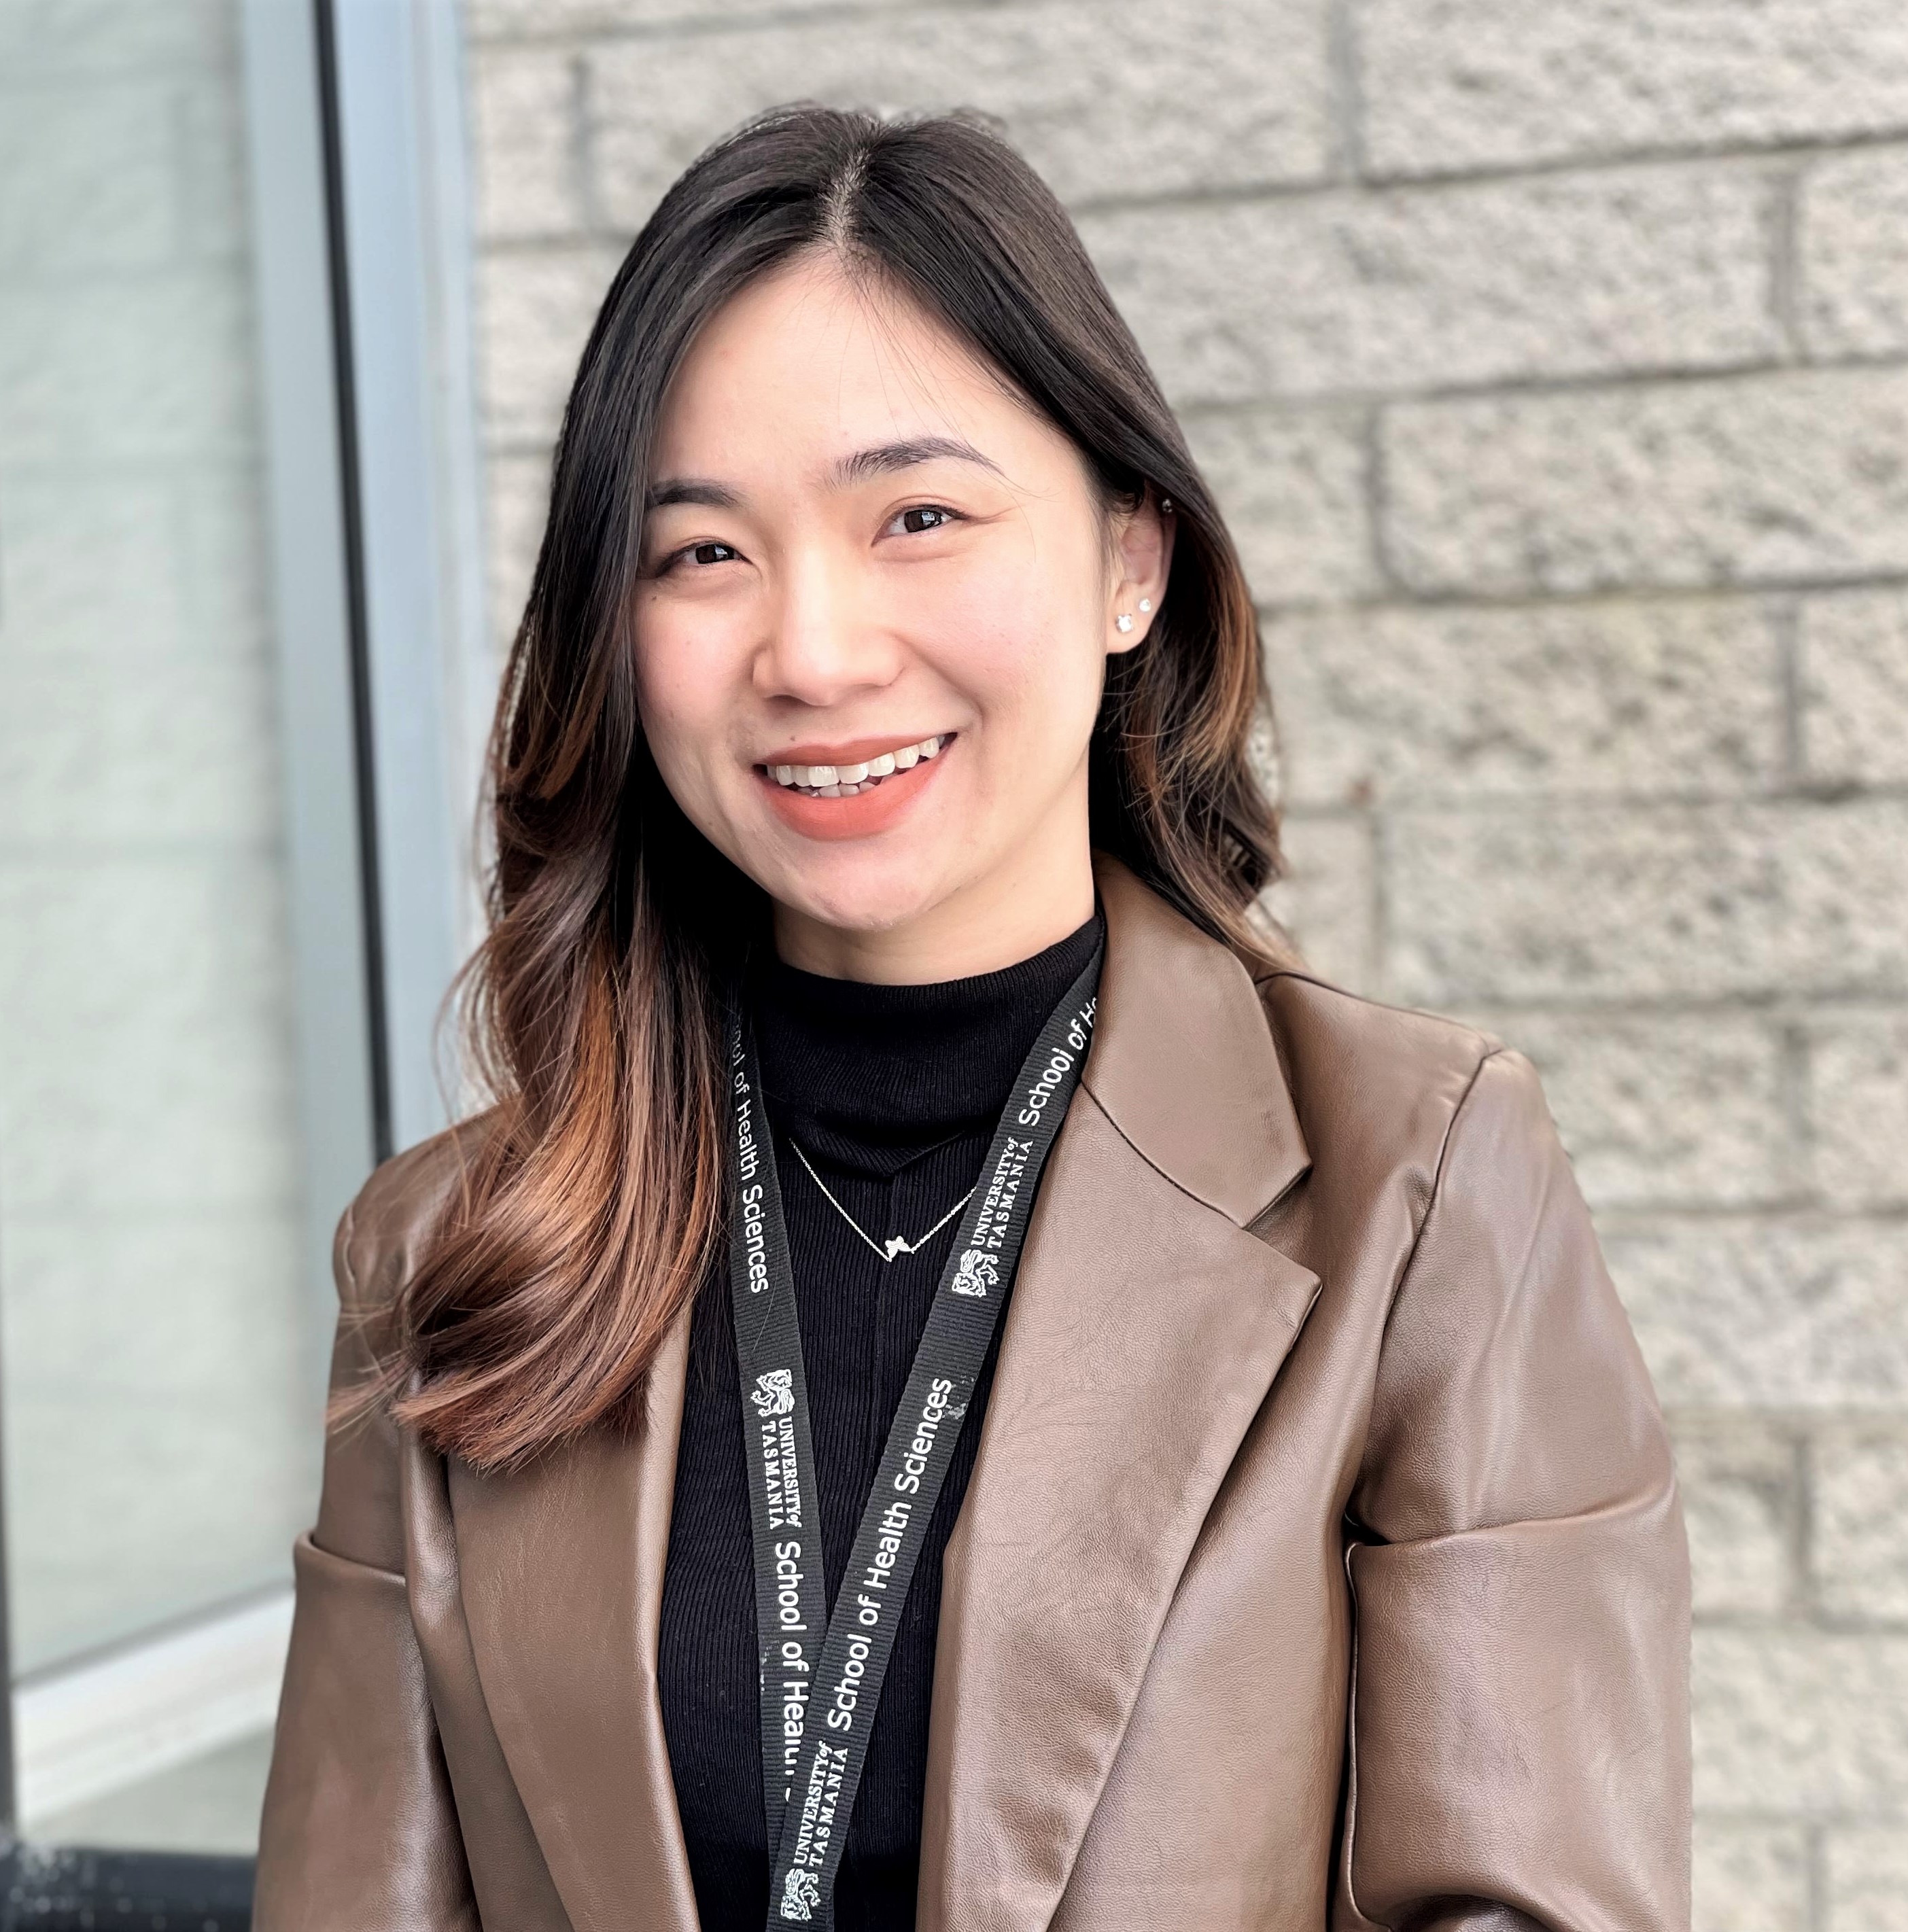 Duyen Tran is completing her PhD in pharmaceutical science at the University of Tasmania.